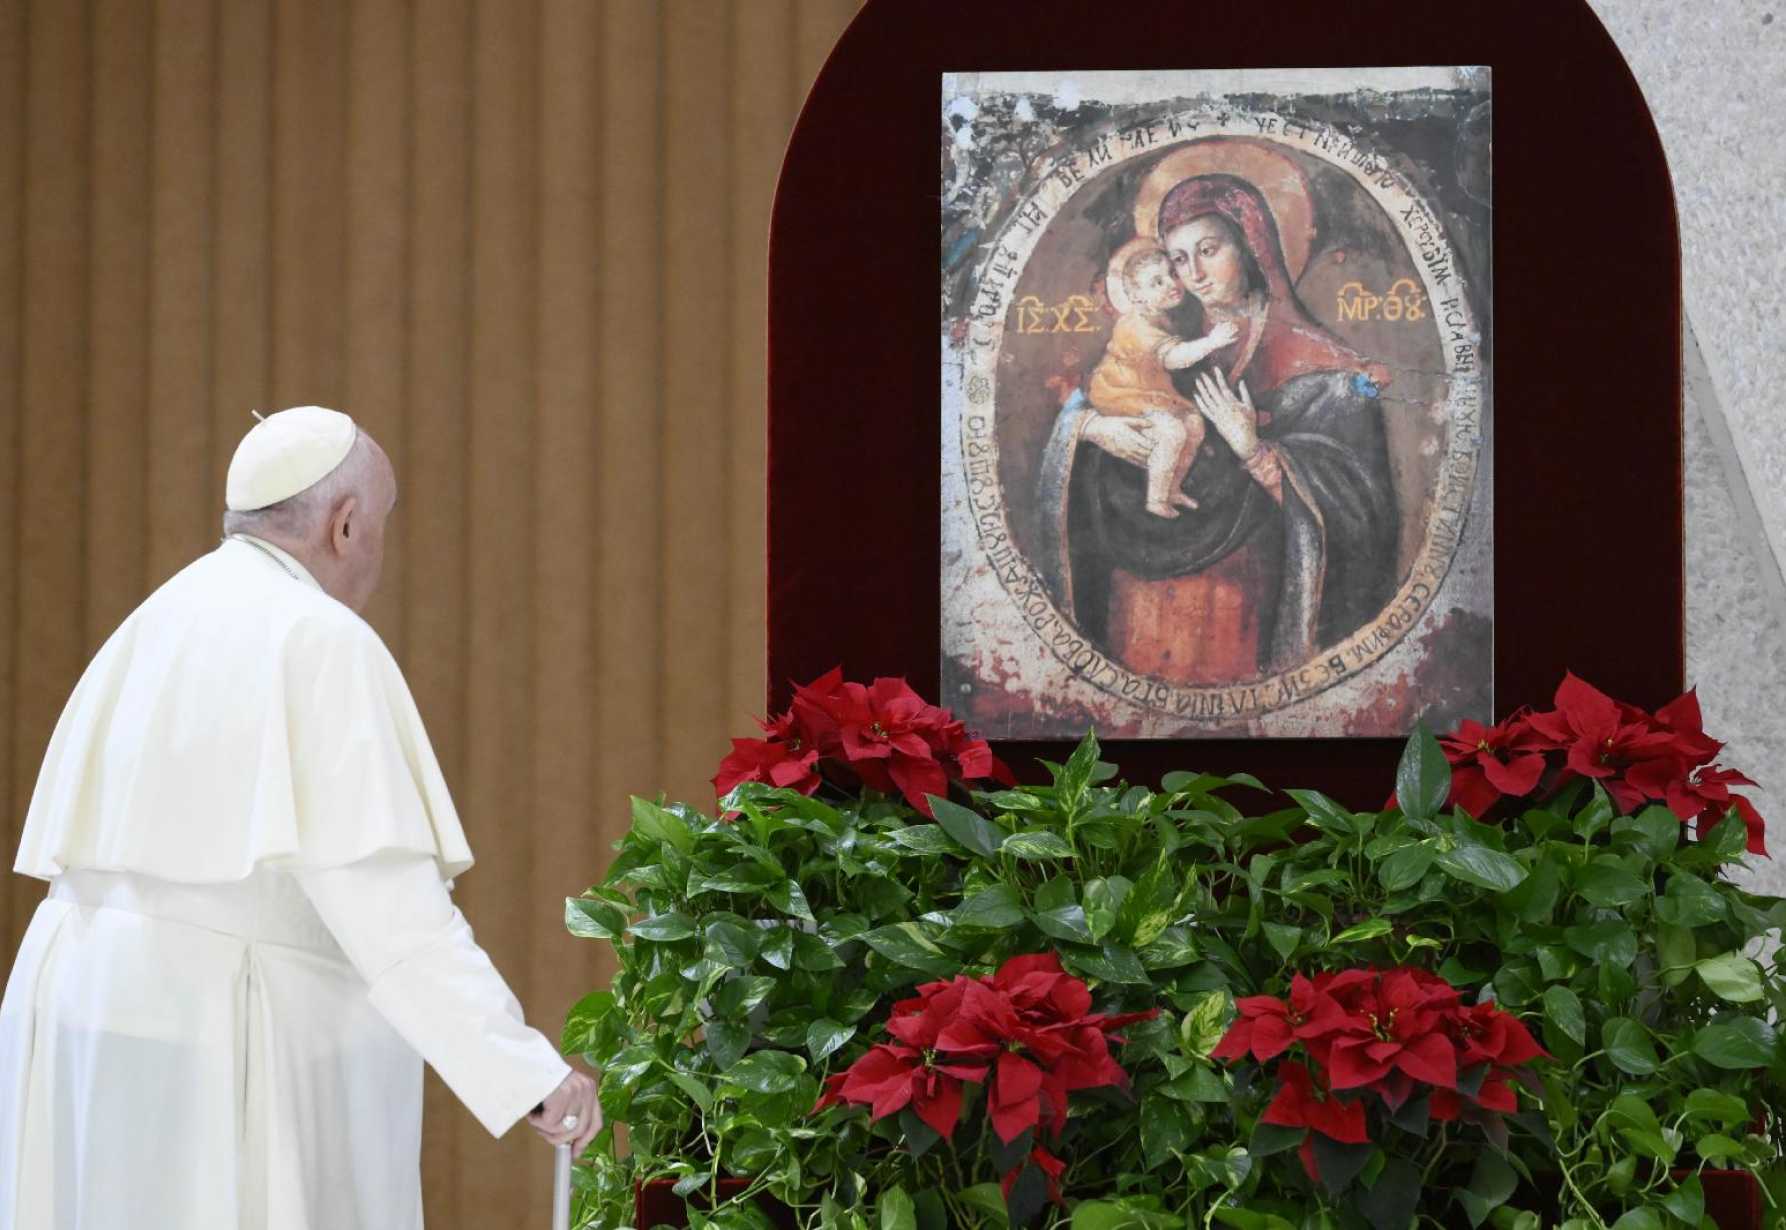 Evangelization is the 'oxygen' of Christian life, pope says